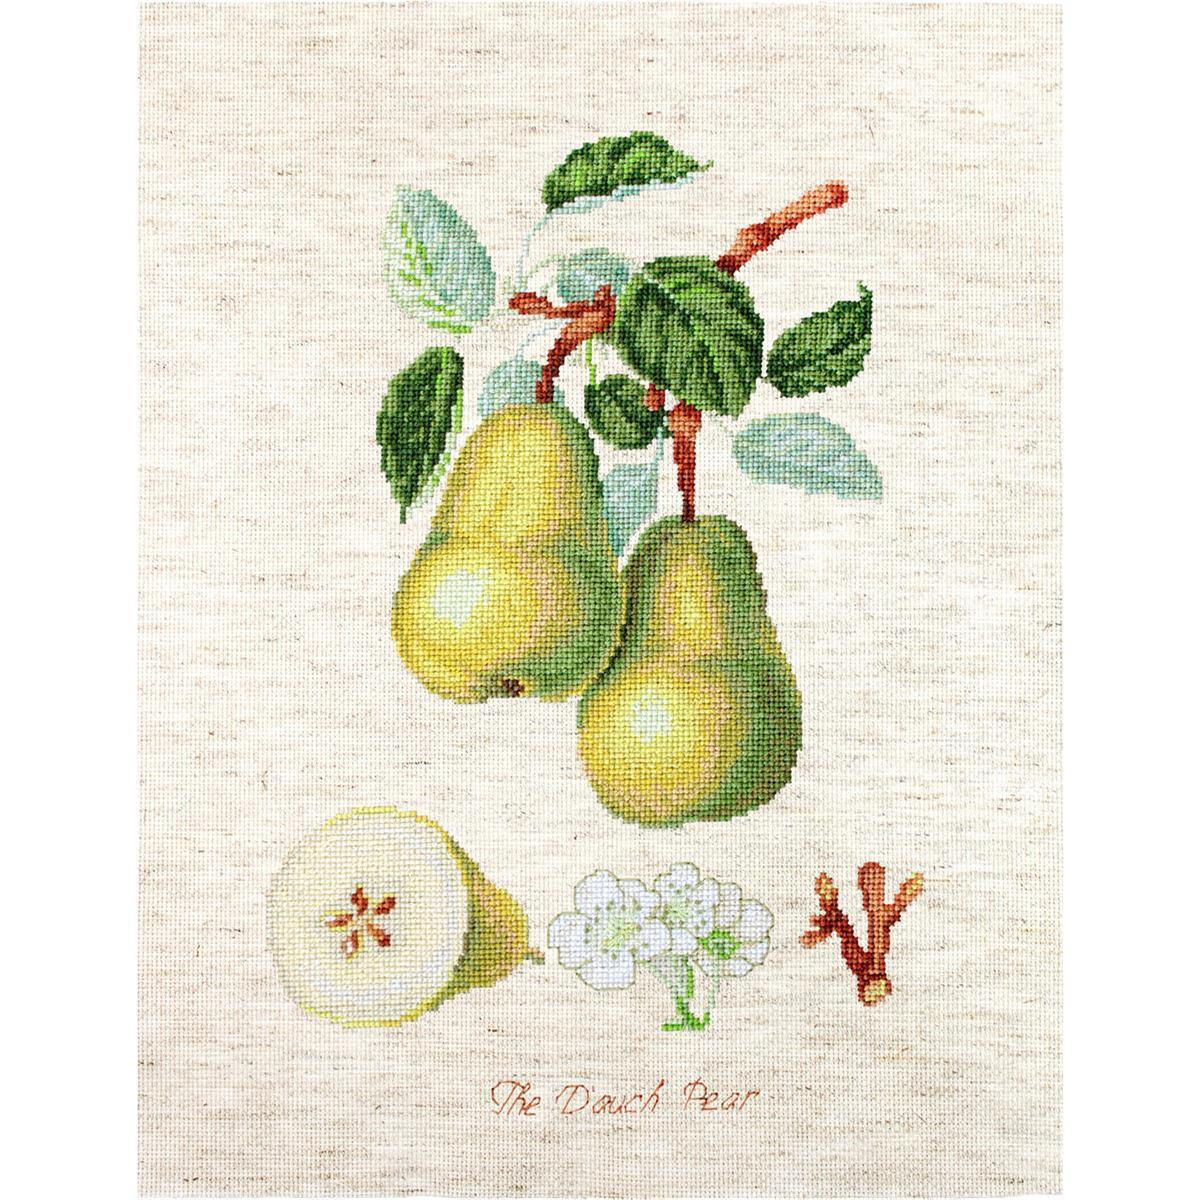 A cross-stitch picture shows two green and yellow pears...